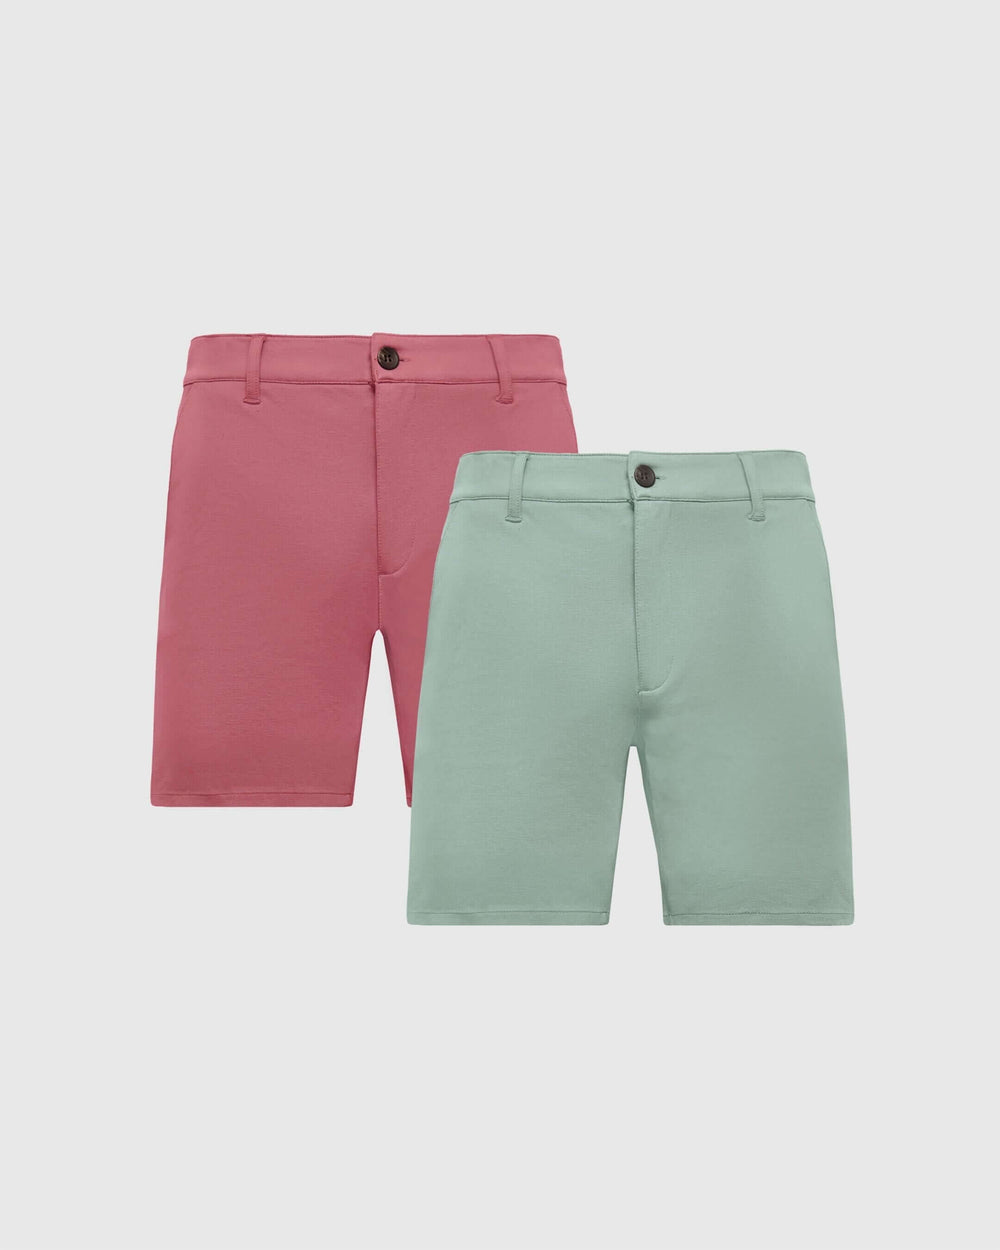 7" Slate Green & Rosewood Comfort Knit Chino Shorts 2-Pack